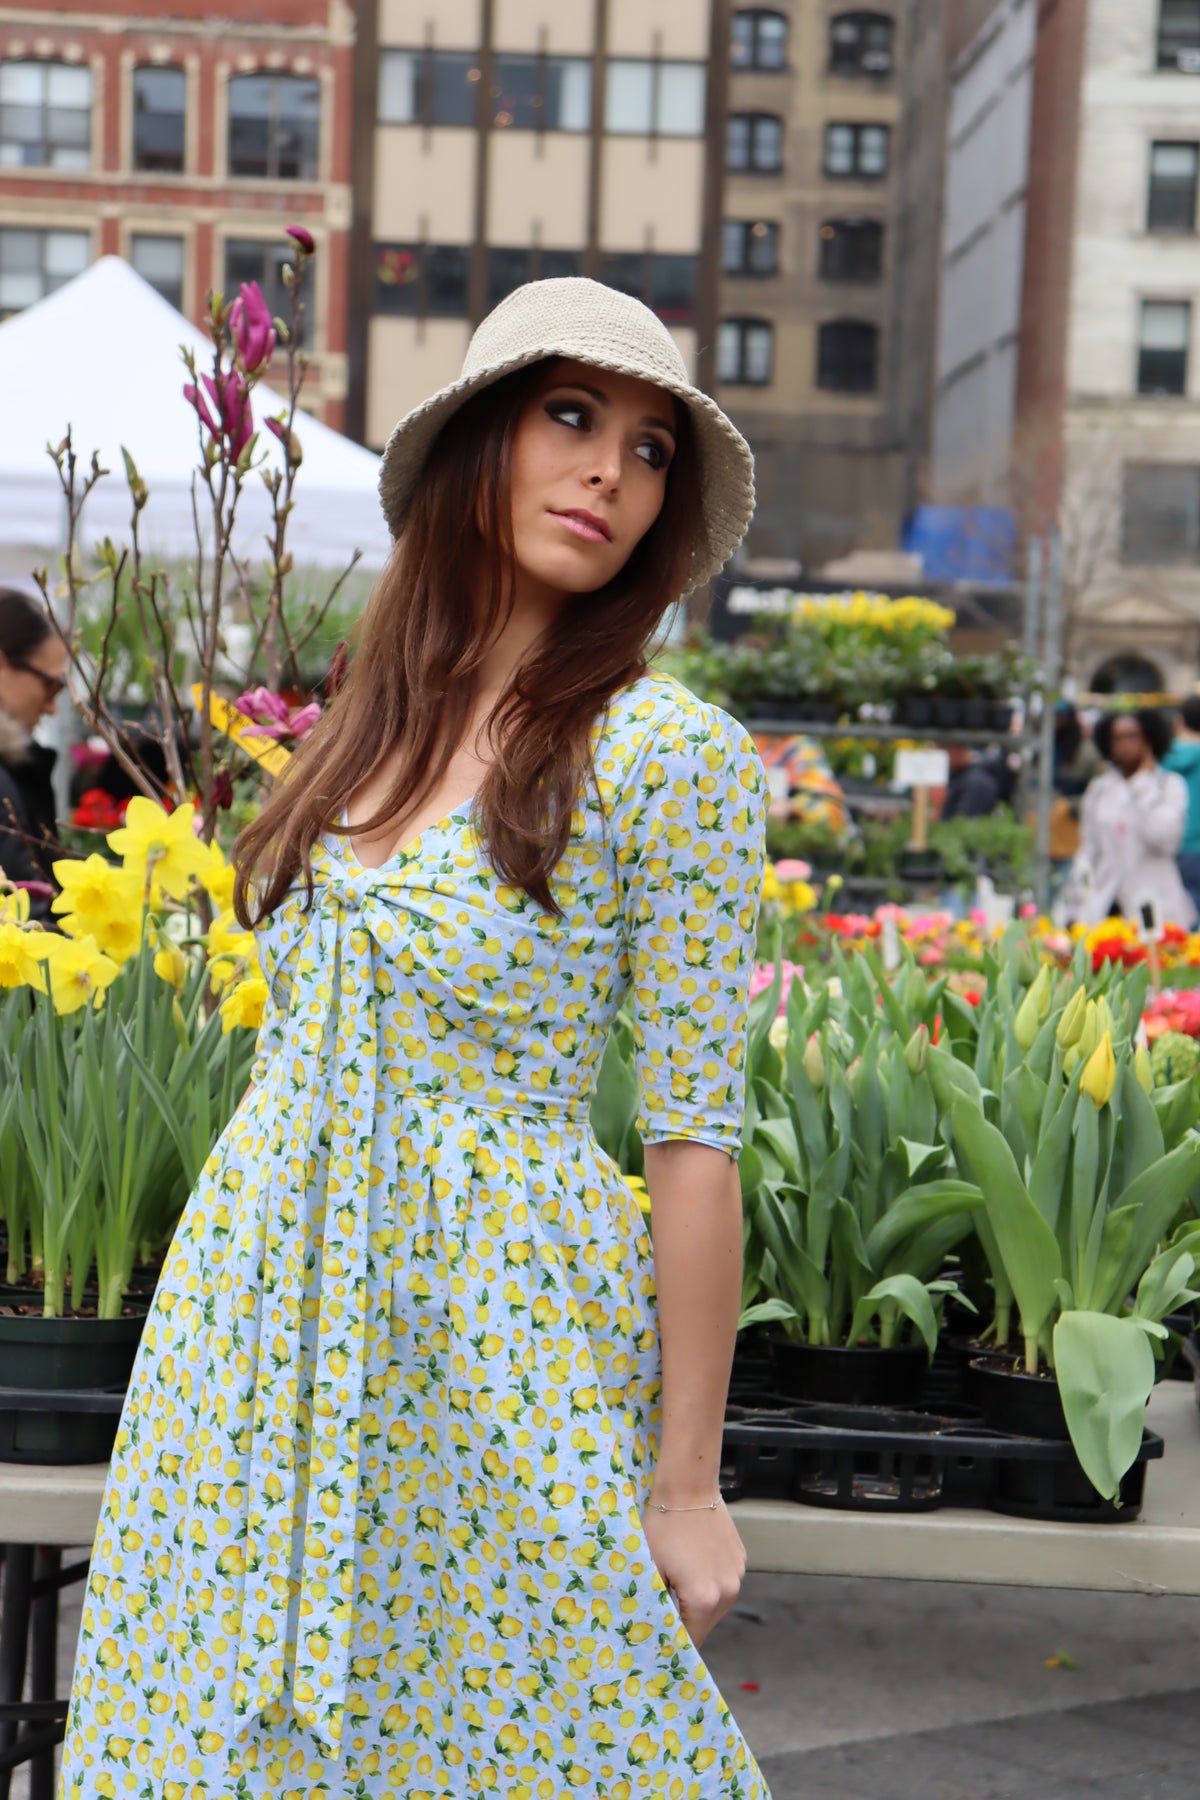 Close up view of Model wearing a tan bucket hat and a midi dress in a lemon print of aqua blue and  yellow in front of a flower display at a farmer's market.